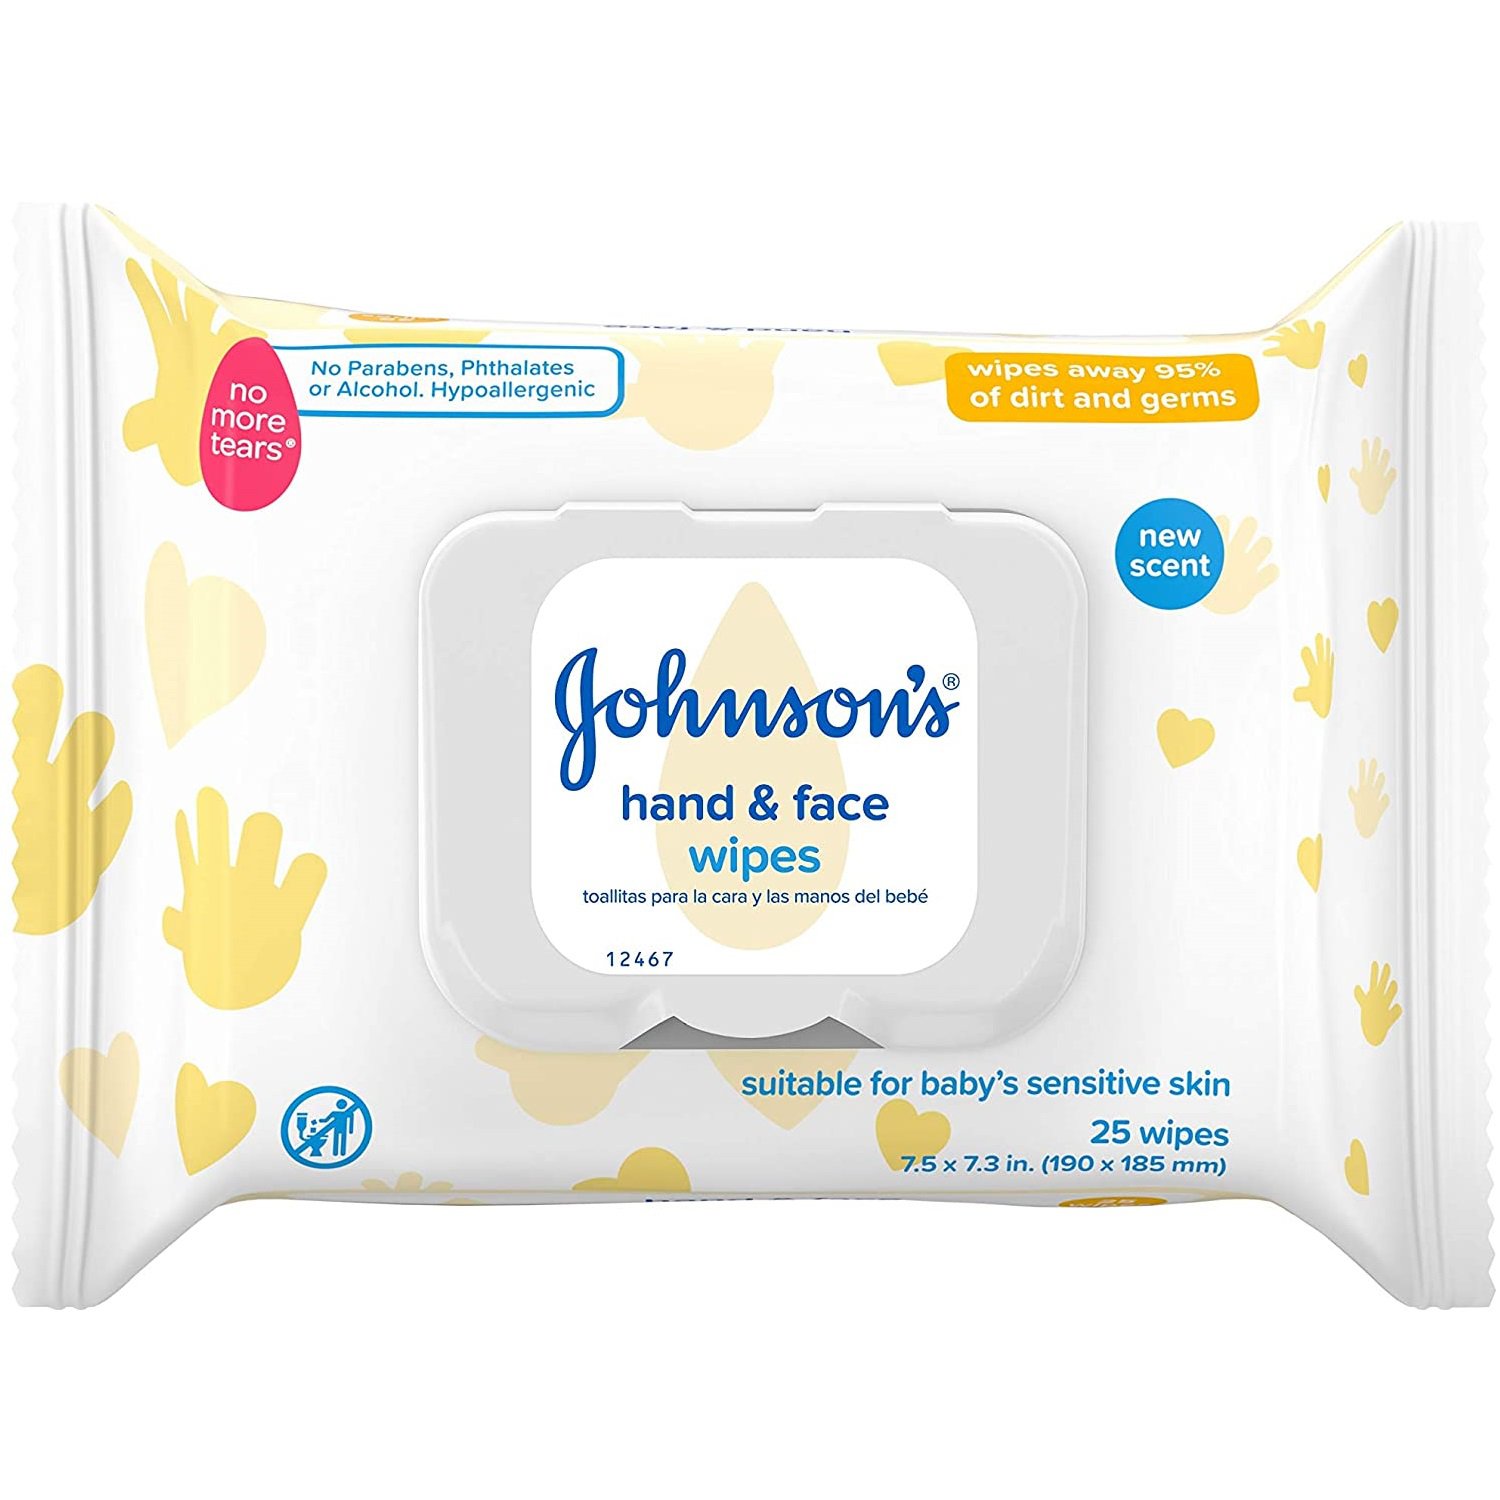 Johnson's hand & face wipes, 25 baby wipes